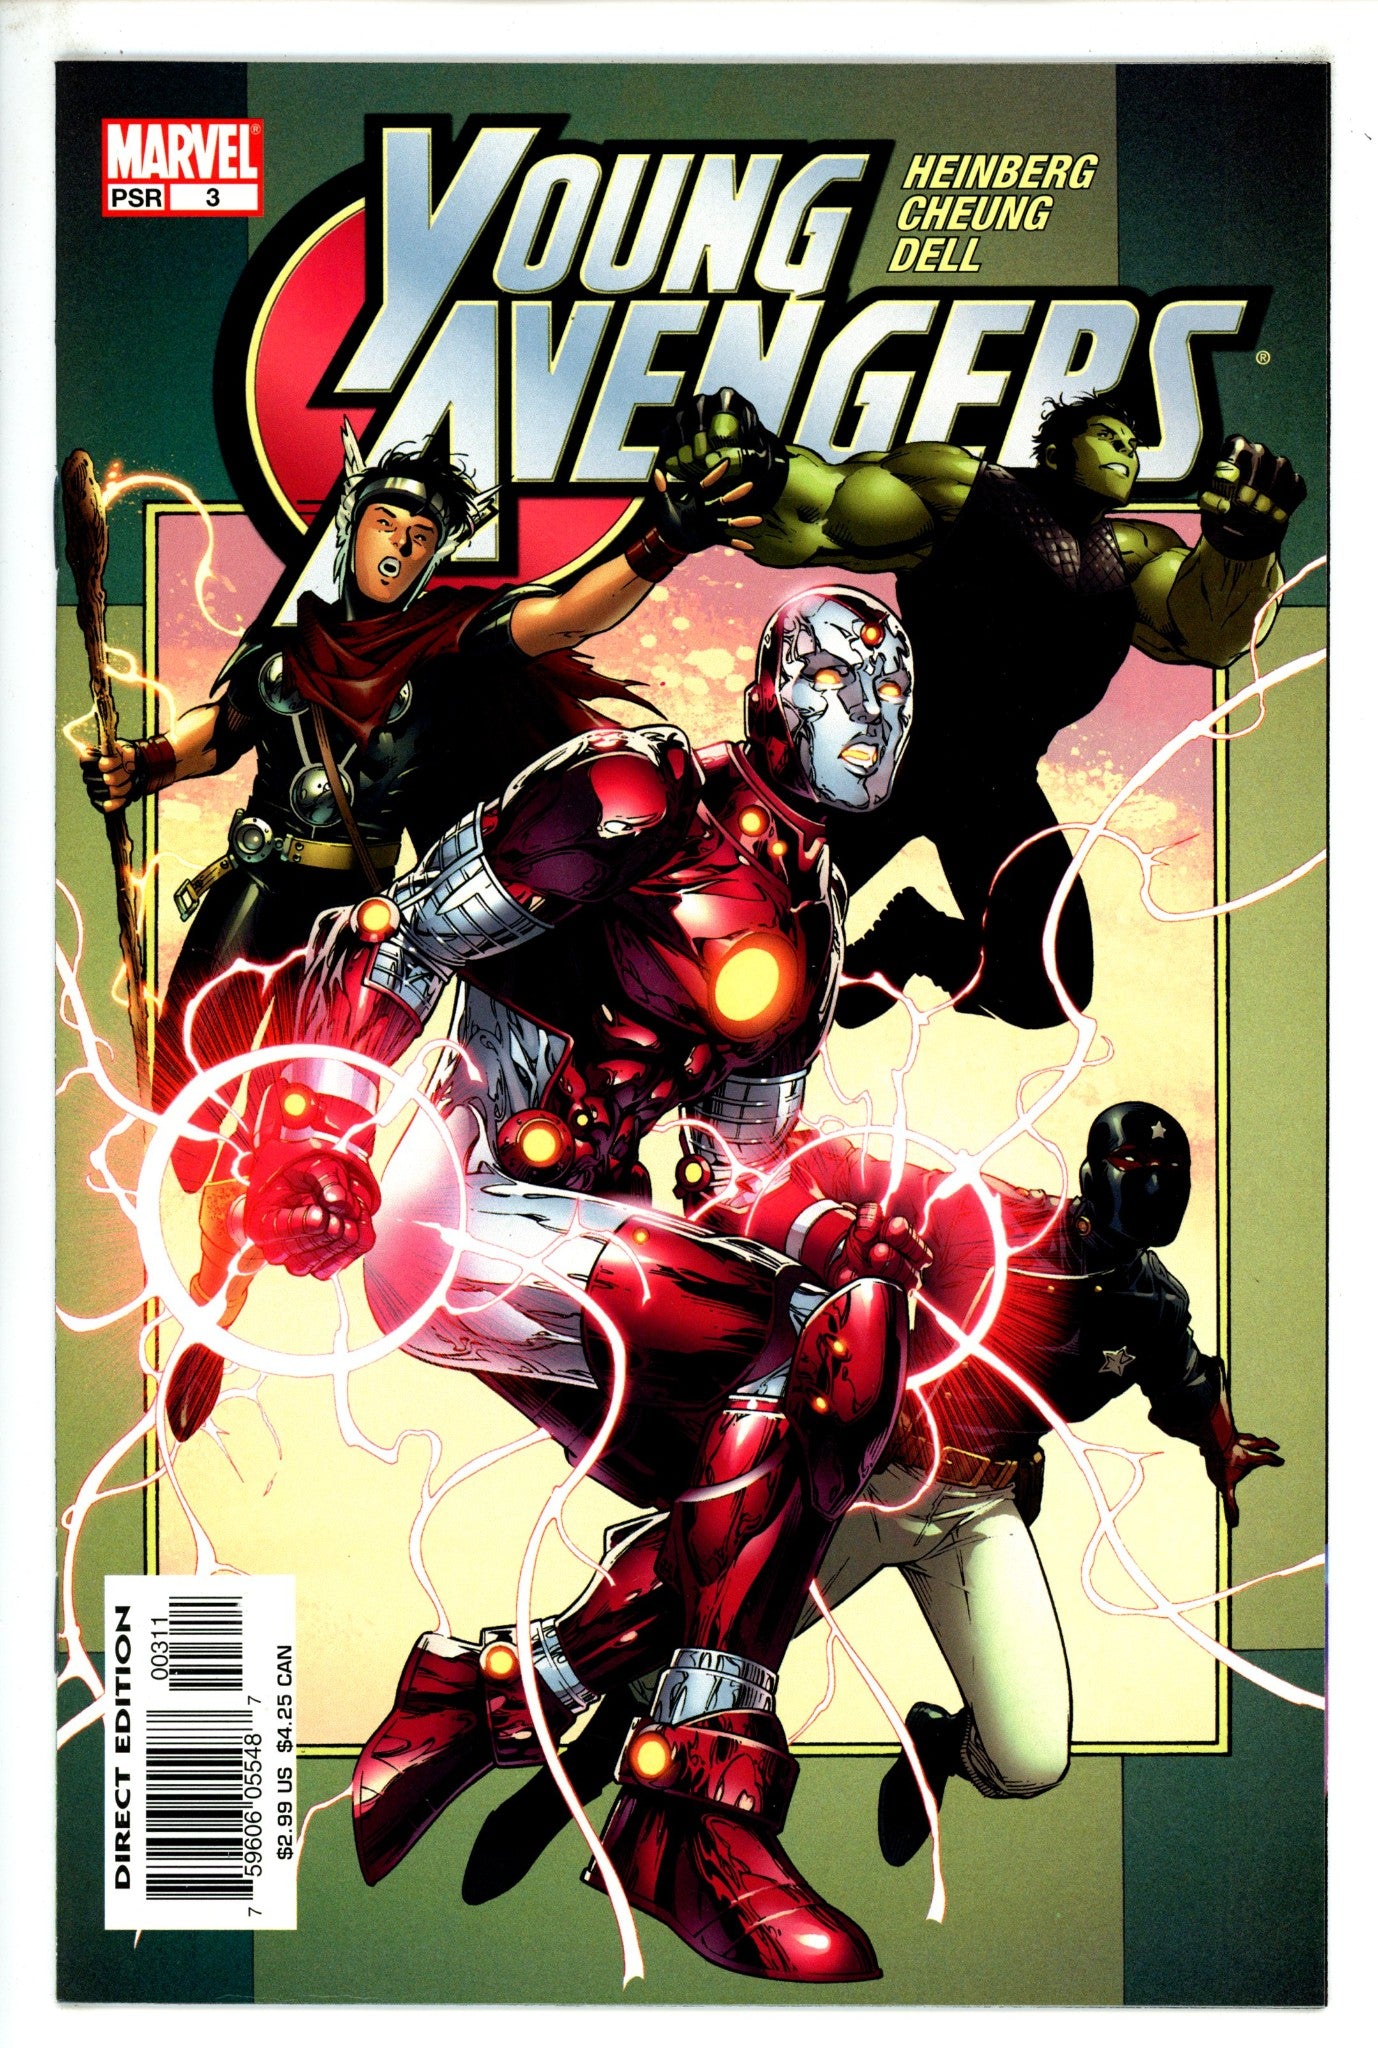 Young Avengers Vol 1 3 NM- (2005)